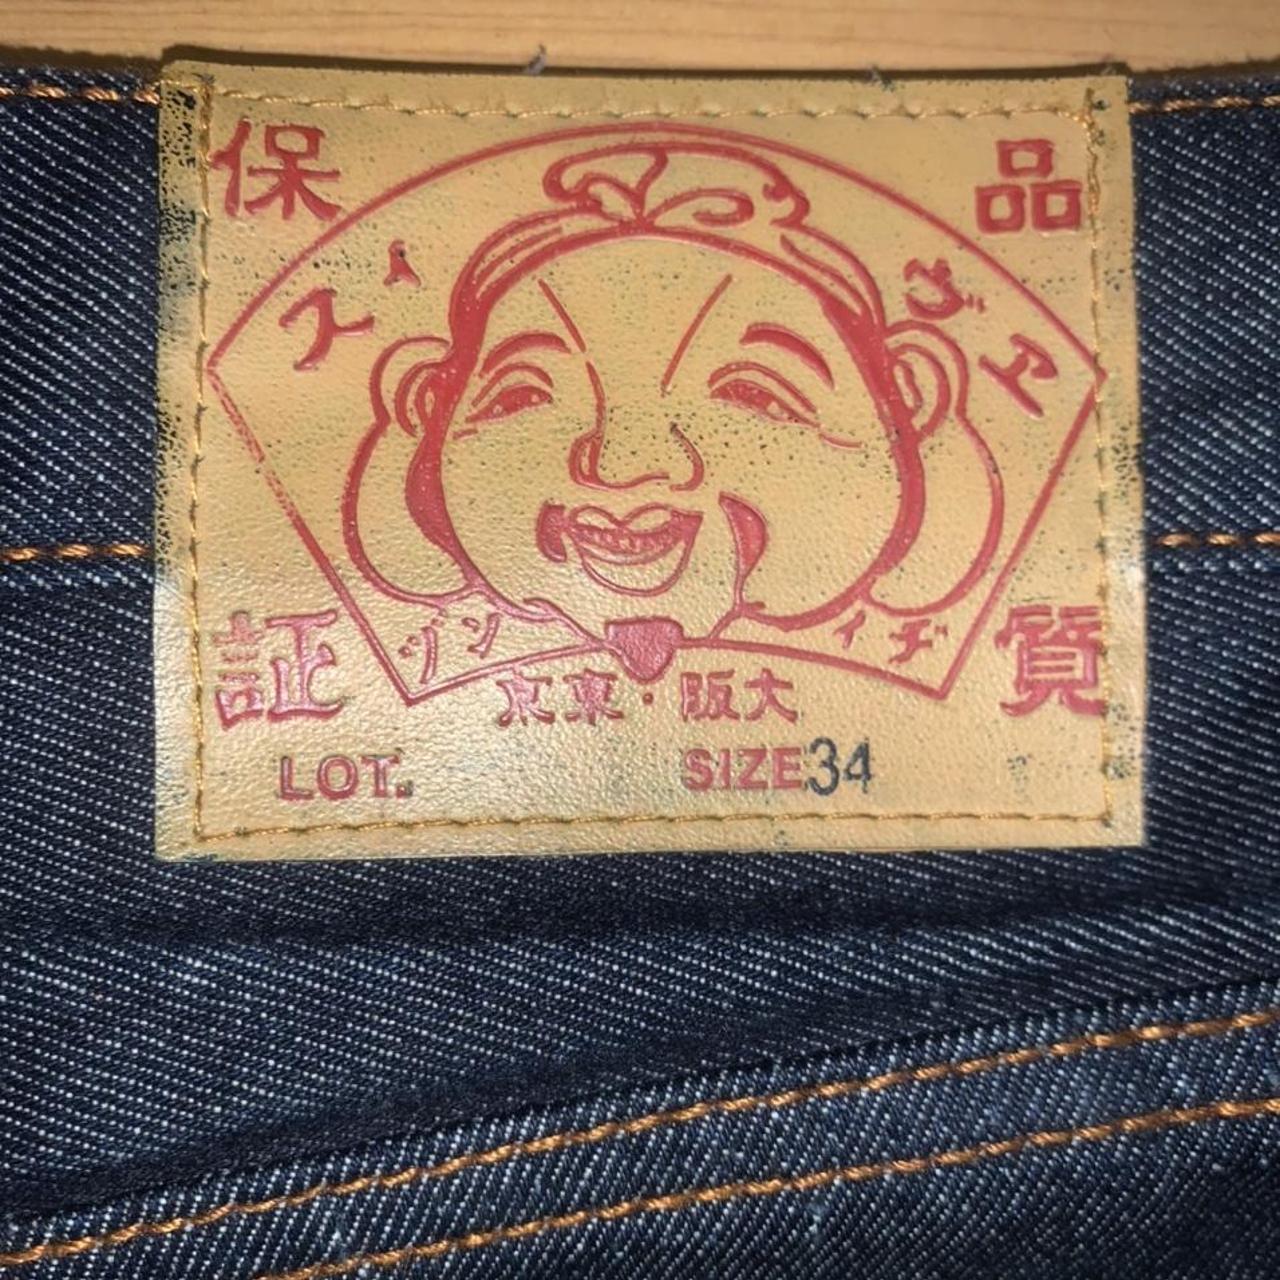 Rare Evisu print Jeans. Red and yellow stitching is